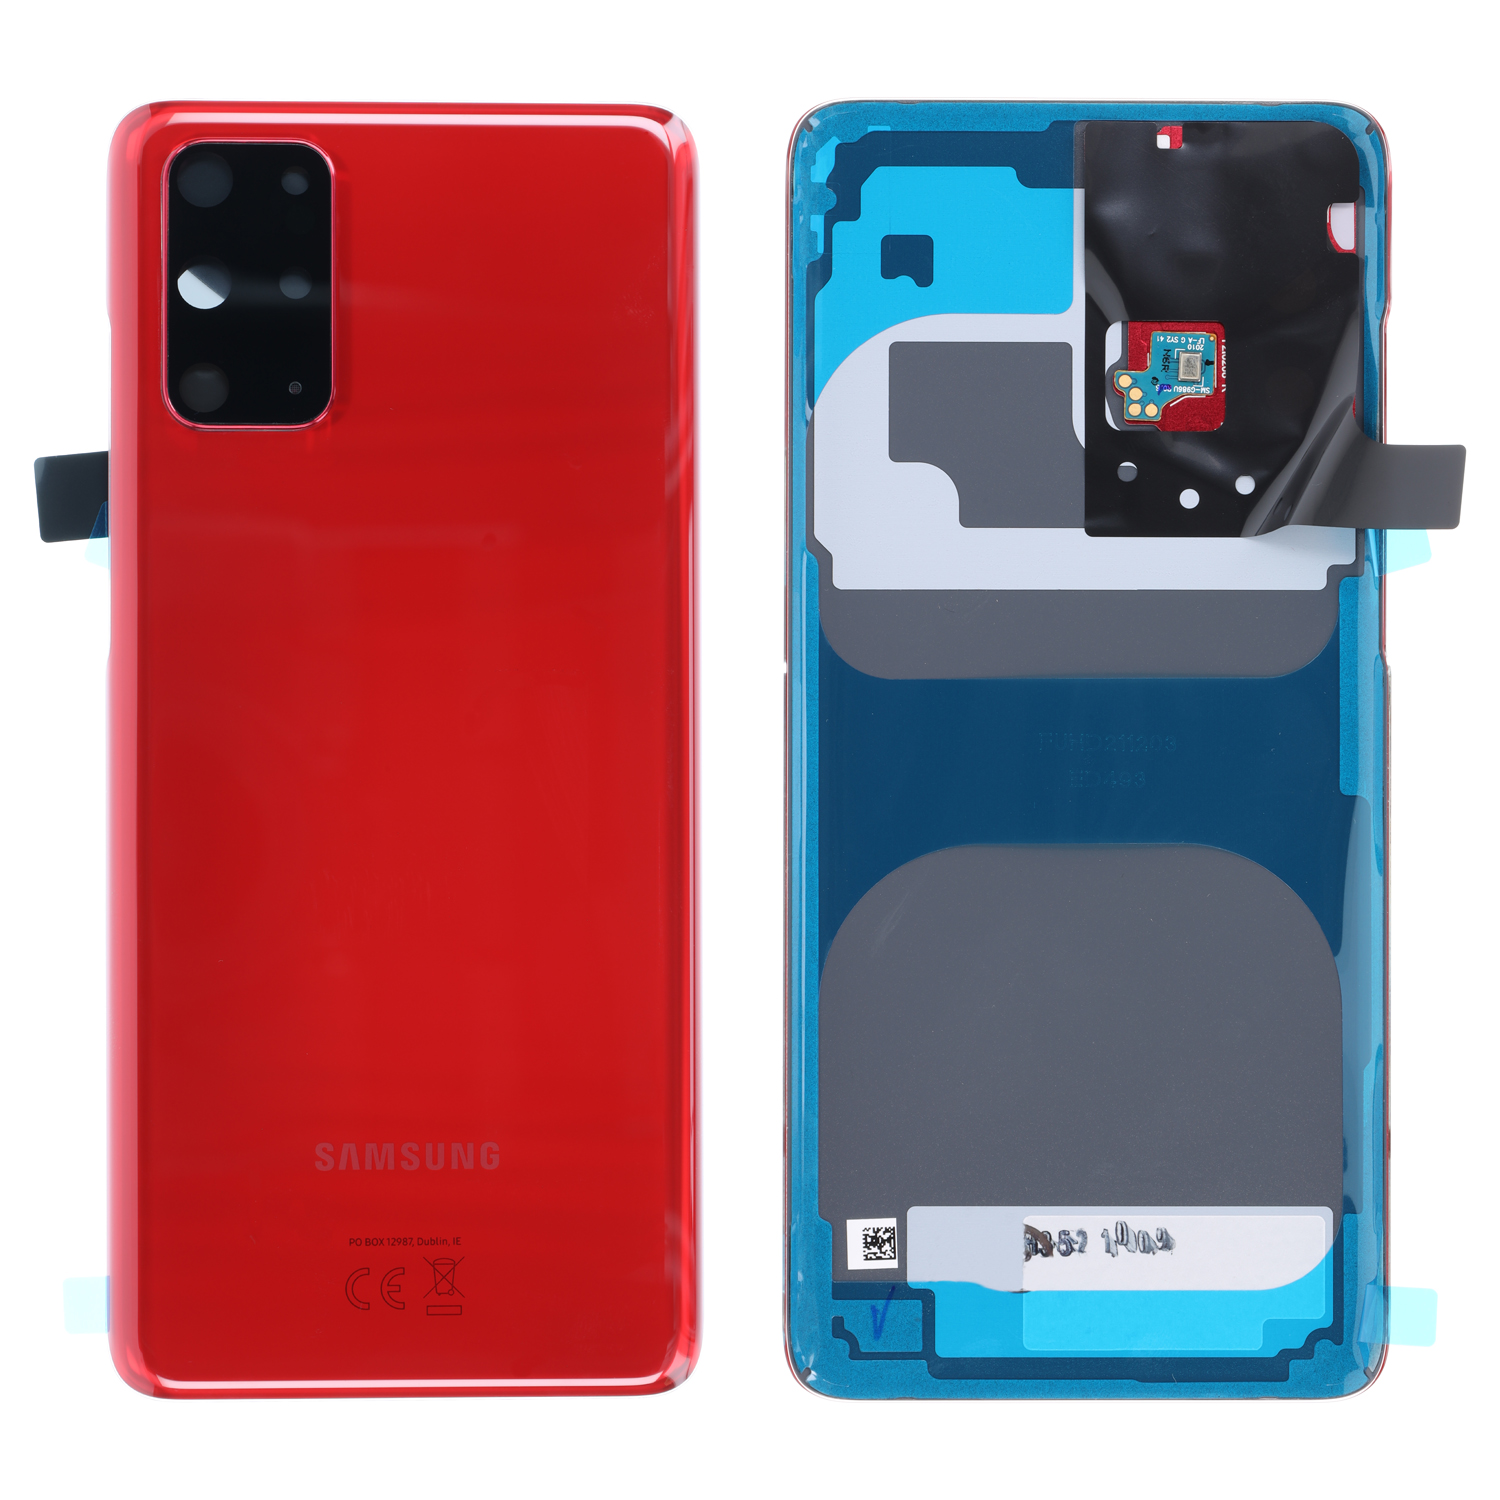 Samsung Galaxy S20+ G985F / S20+ 5G G986B Battery Cover, Aura Red, Service Pack